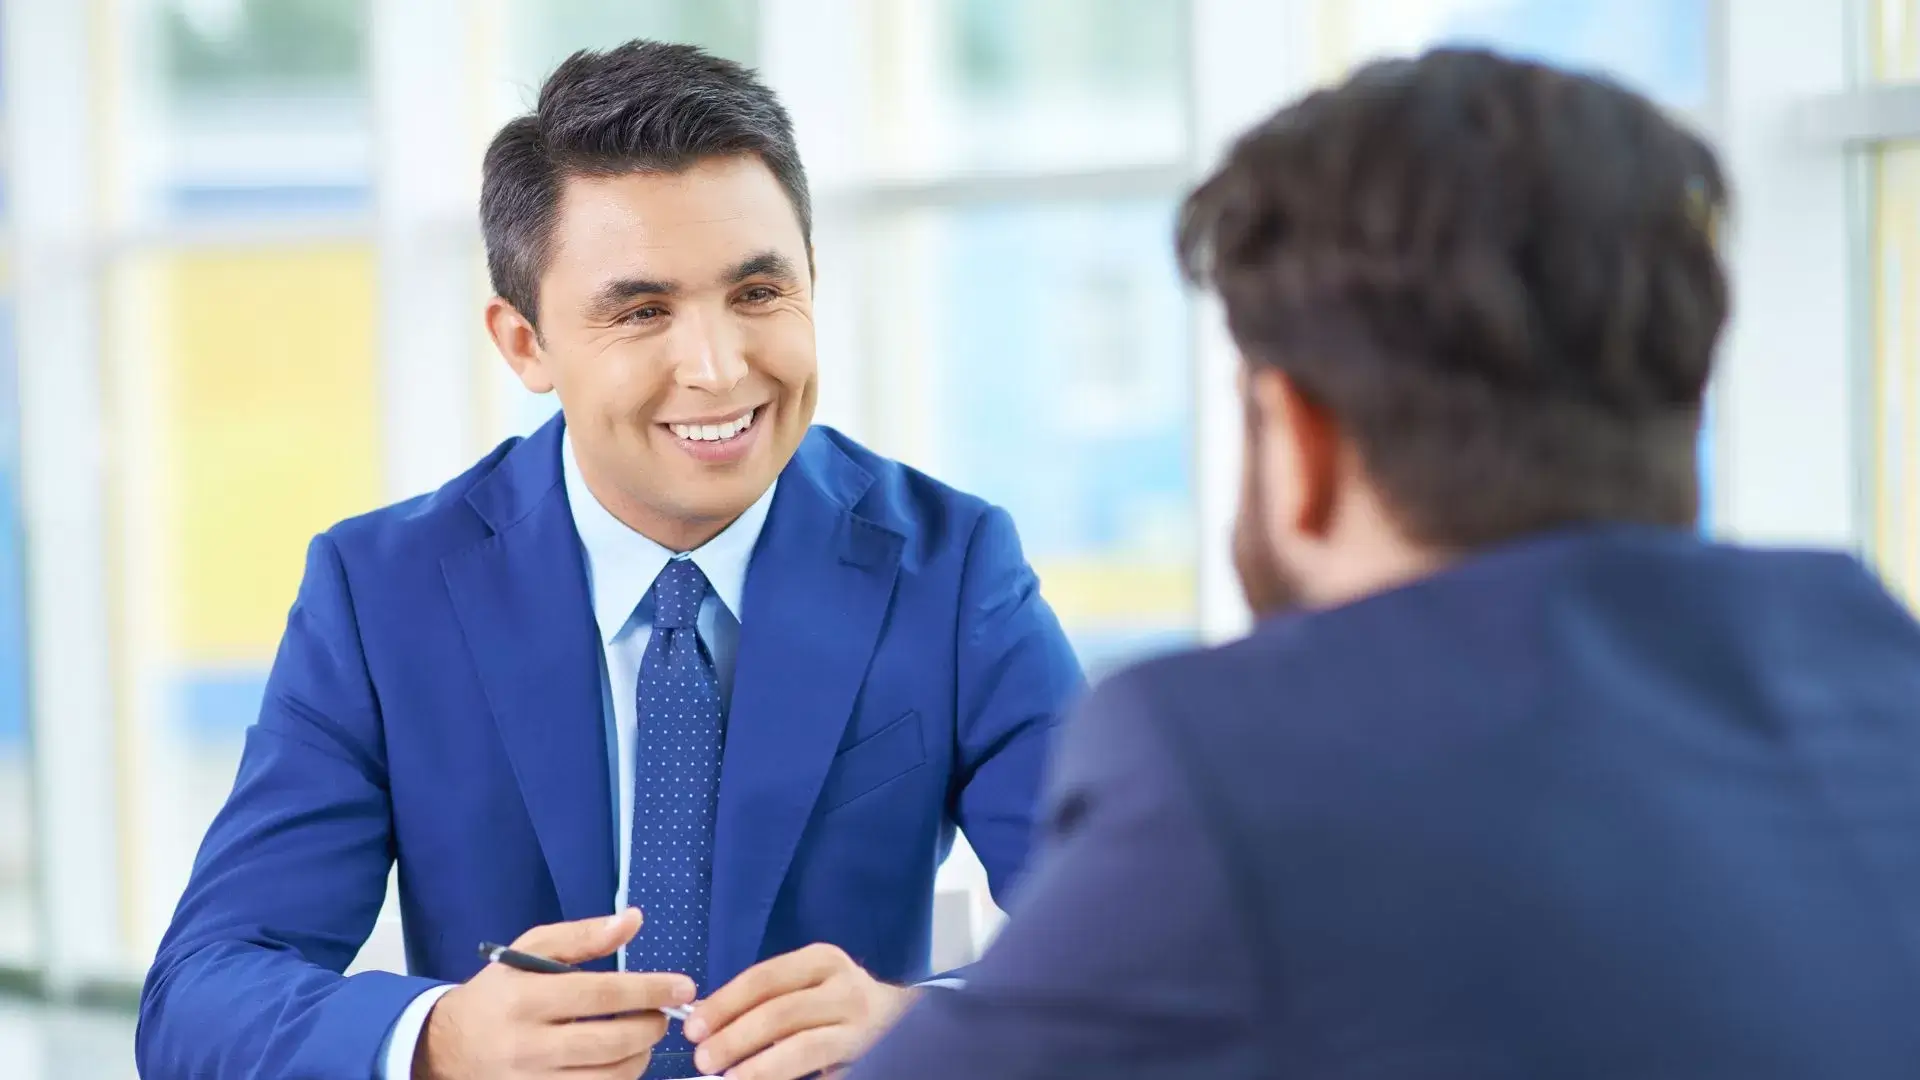 Interview Preparation: 11 Insider Tips from a Top Recruiter to Ace Your Next Interview